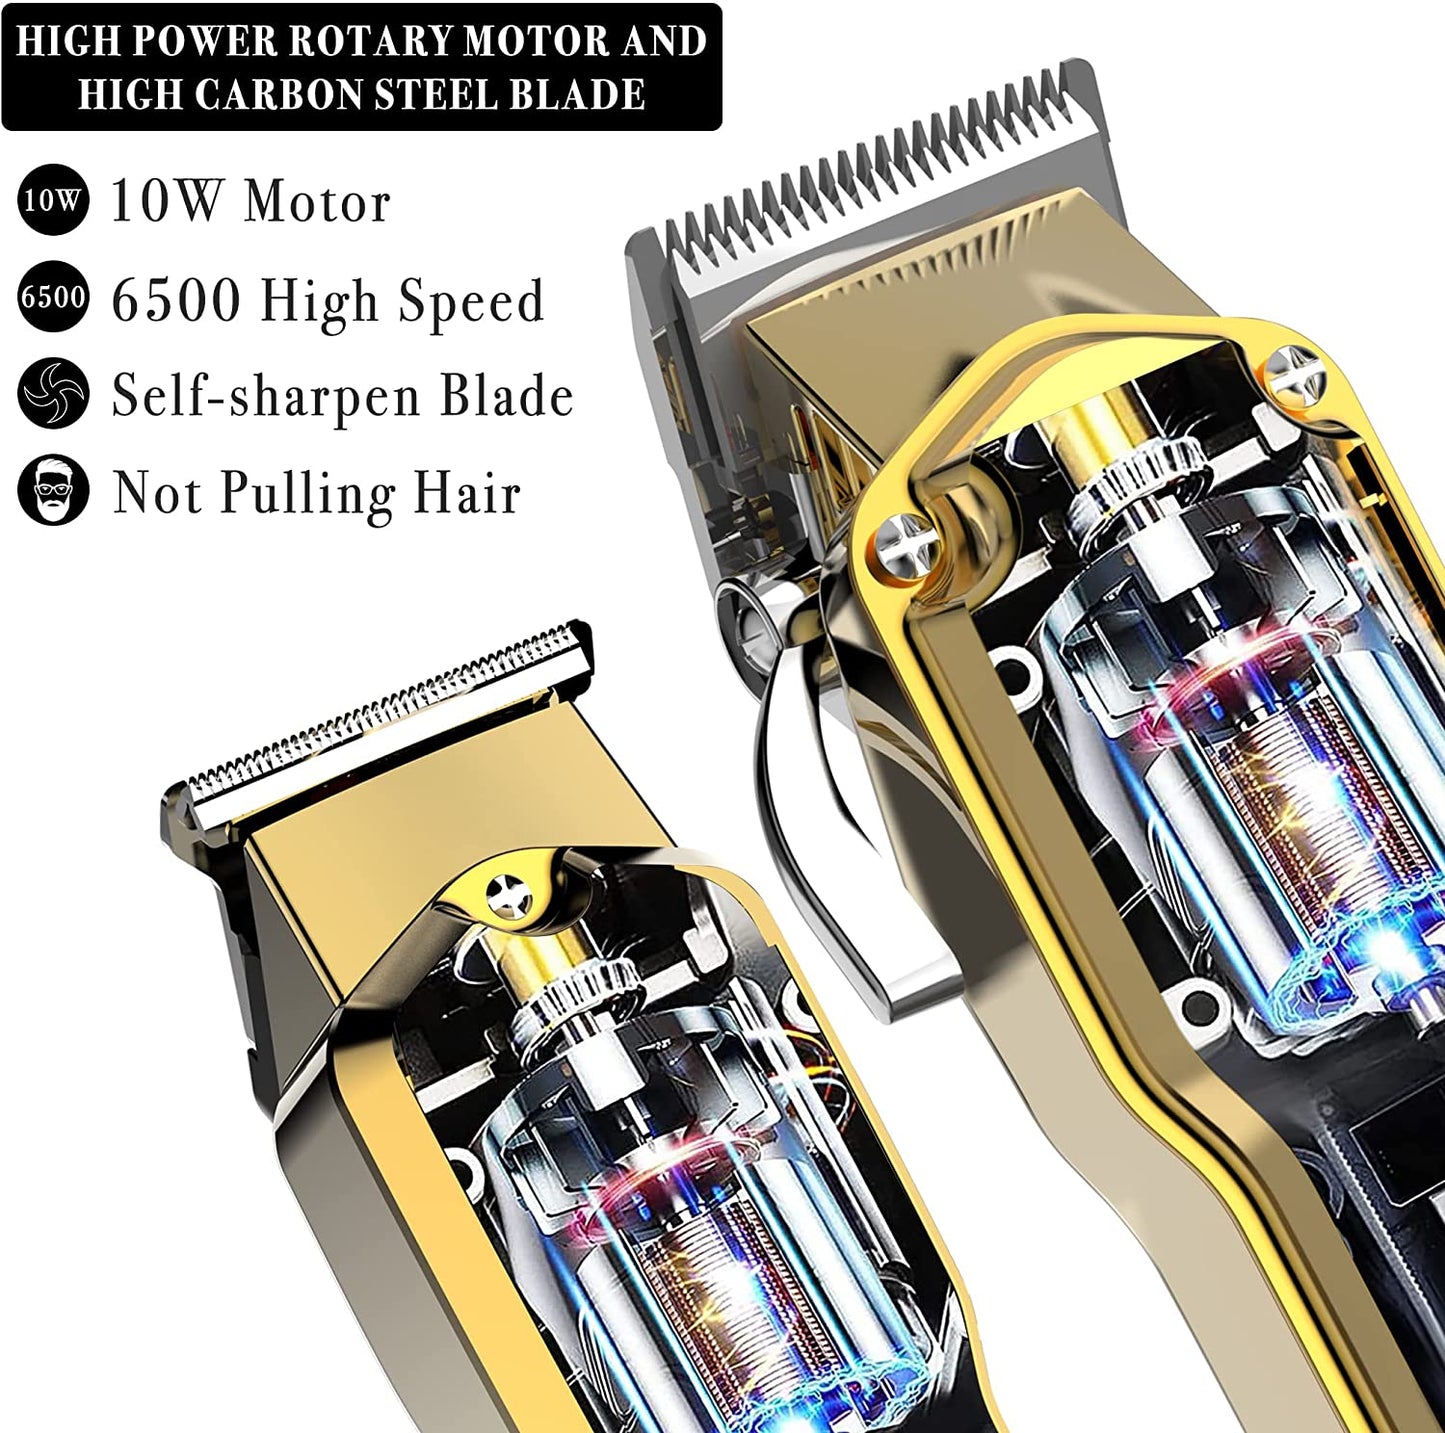 Full metal professional hair clipper combo kit barber cordless hair trimmer for men powerful electric hair cut machine tool